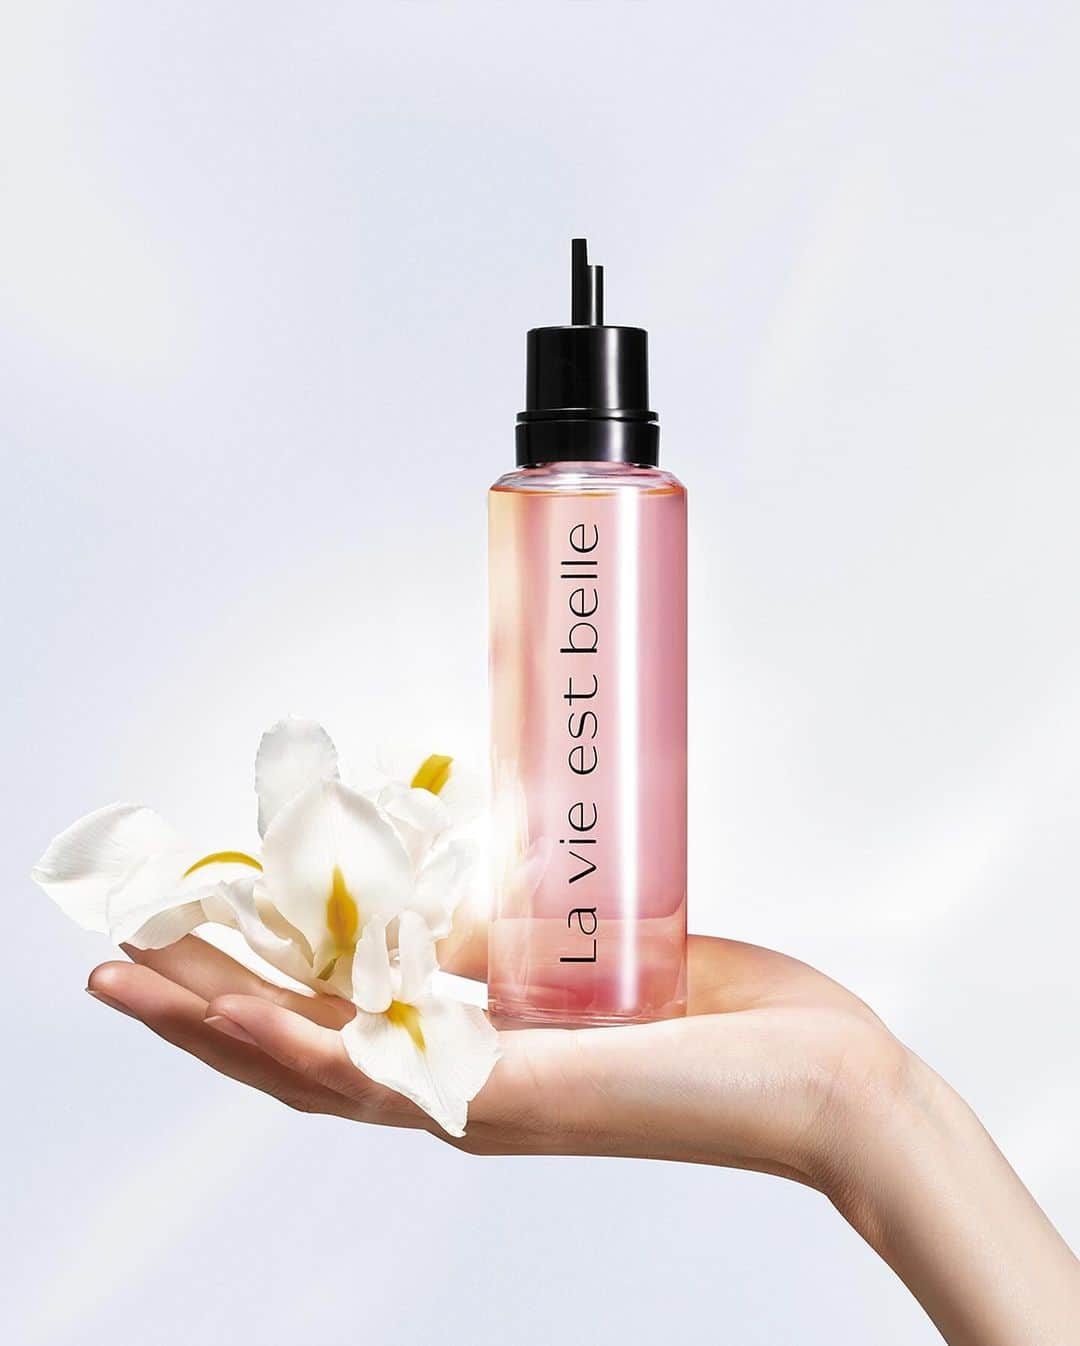 Lancôme Officialのインスタグラム：「The most elegant combination reinforcing Lancôme’s sustainability efforts. By choosing a La vie est belle refill, you reduce the material’s consumption needed to create one fragrance bottle and can refill your fragrance twice using it.  #Lancome #Lavieestbelle #Fragrance #Refill」